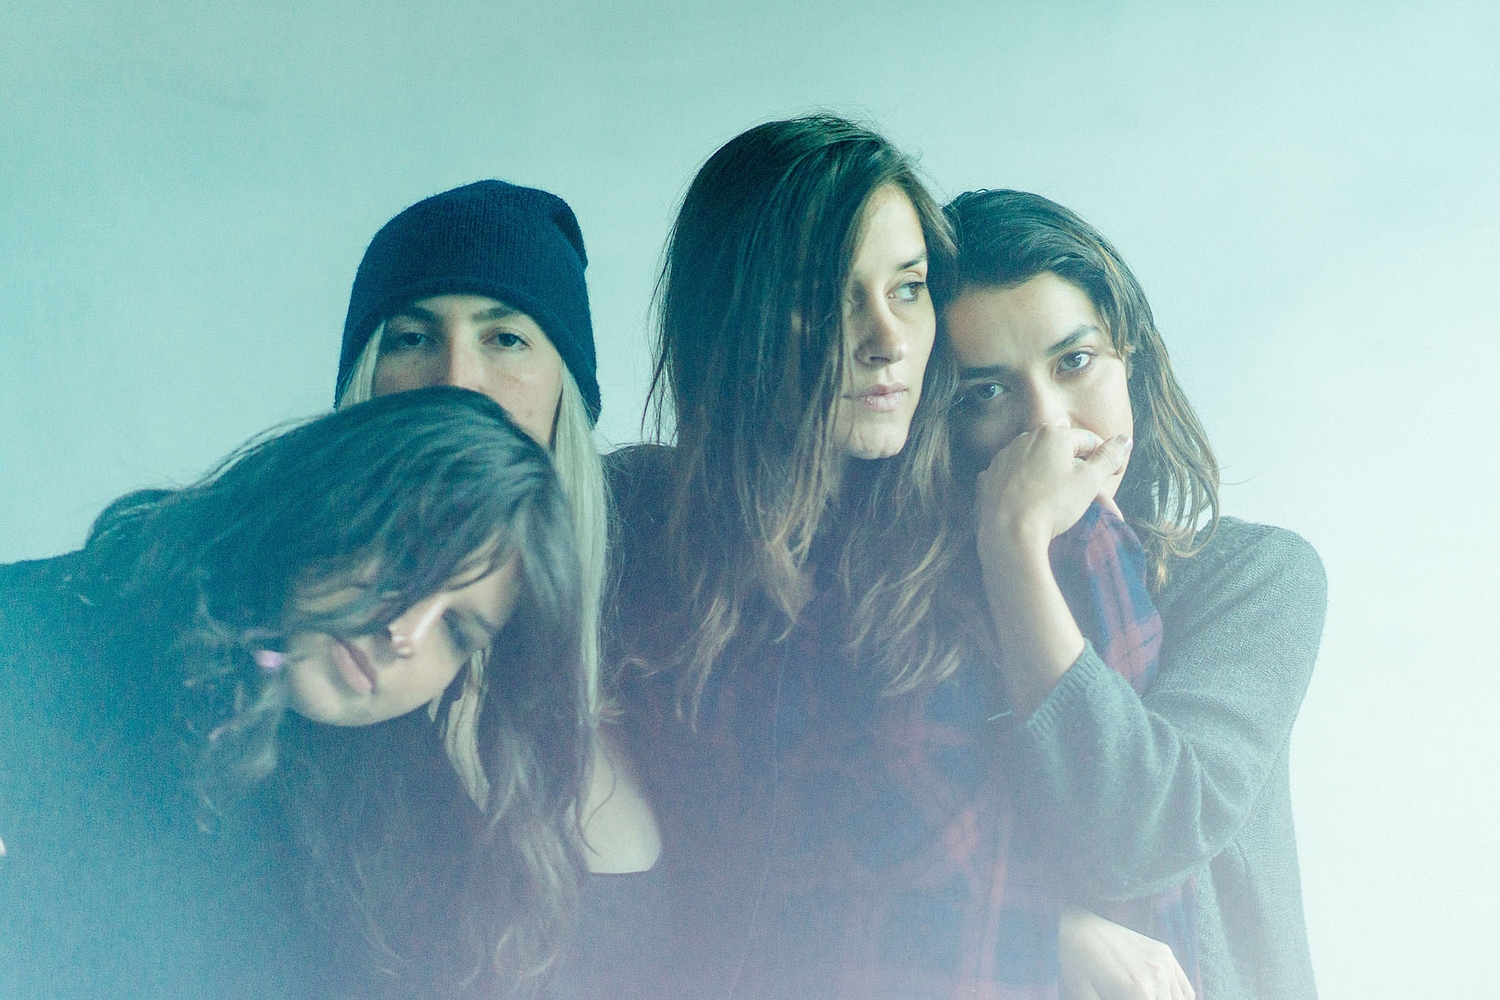 Warpaint won’t be releasing a new album any time soon